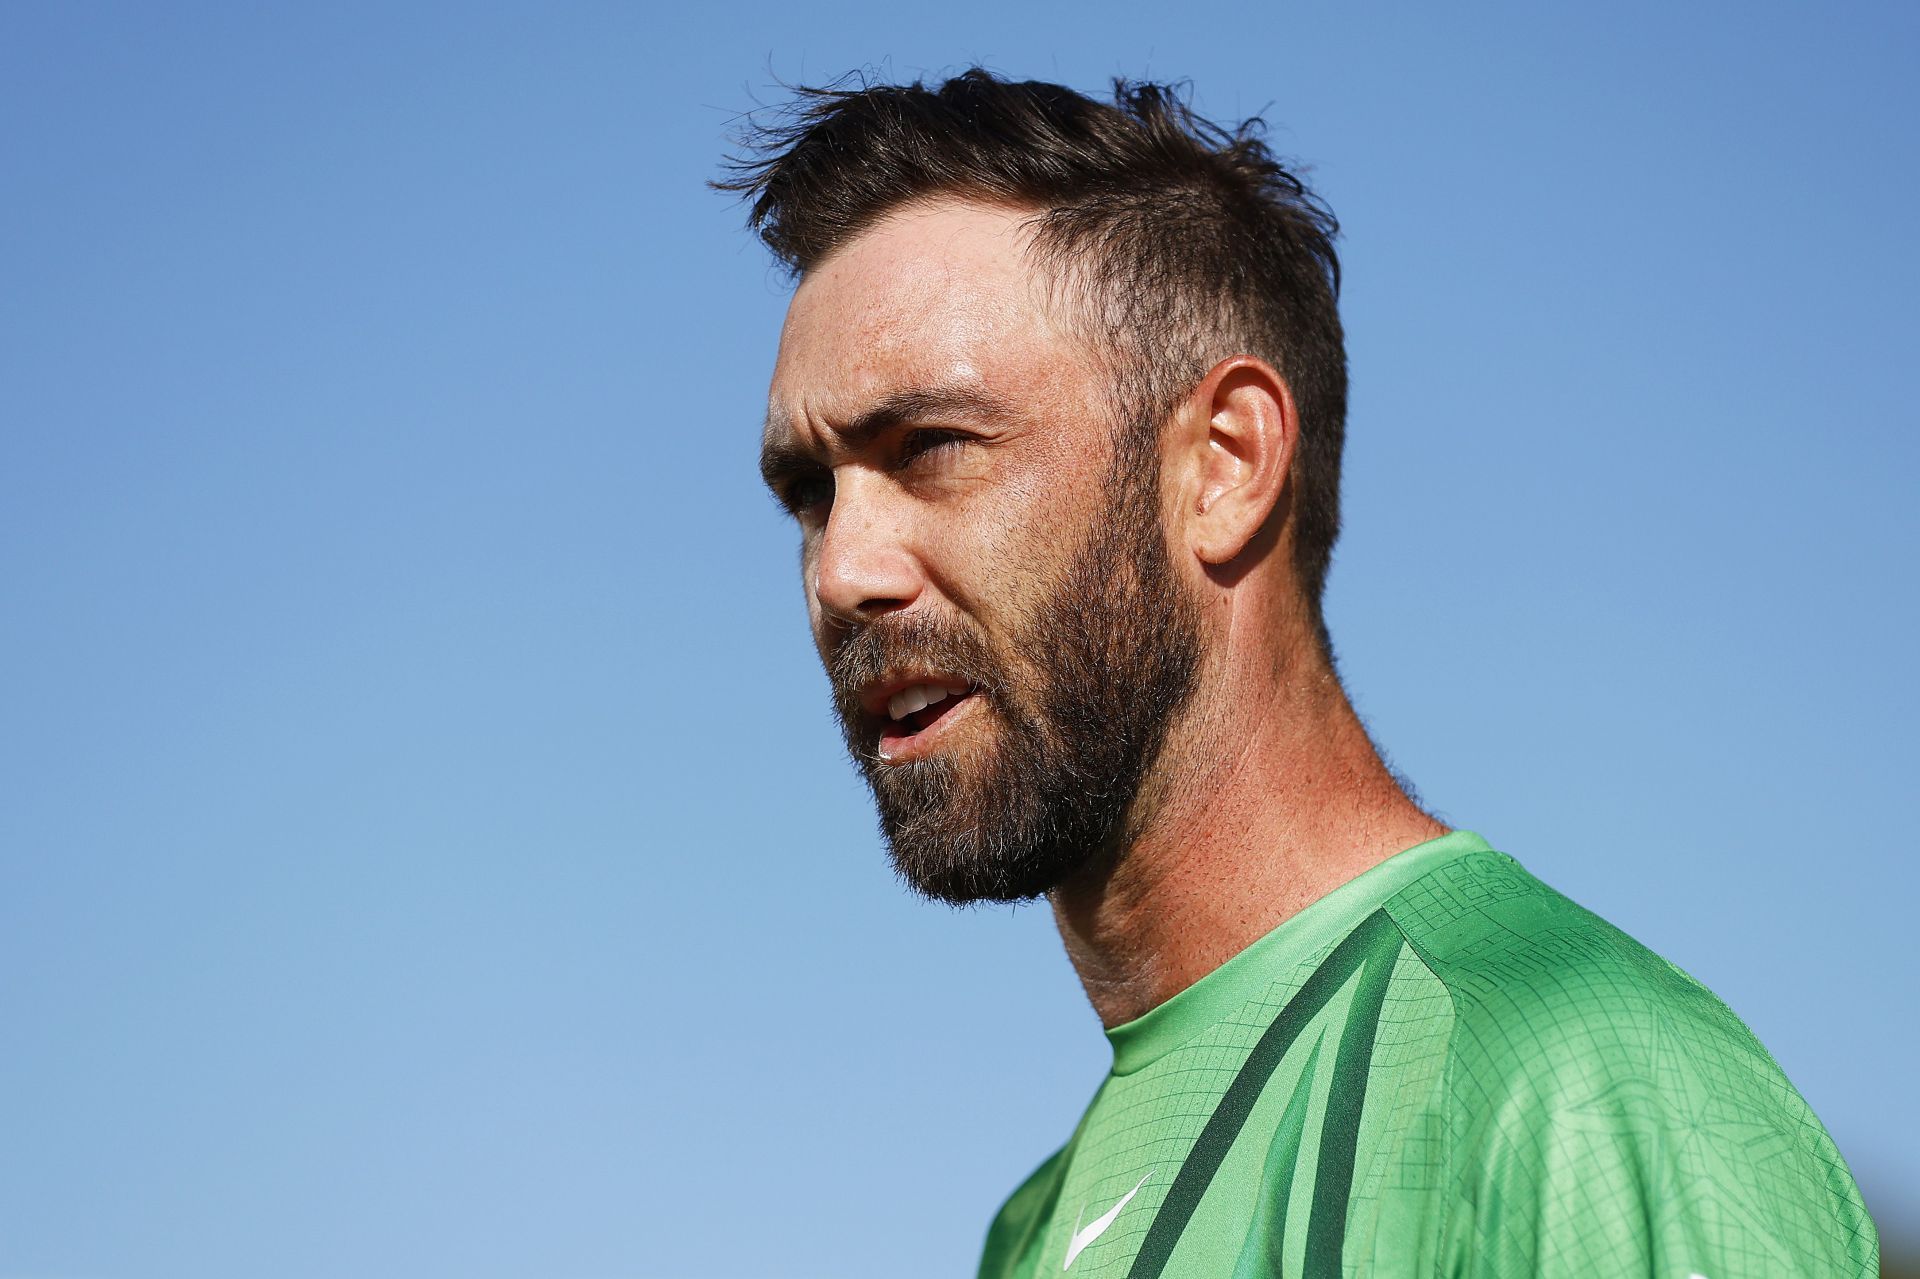 Glenn Maxwell will look to lead the Stars to the title this season.